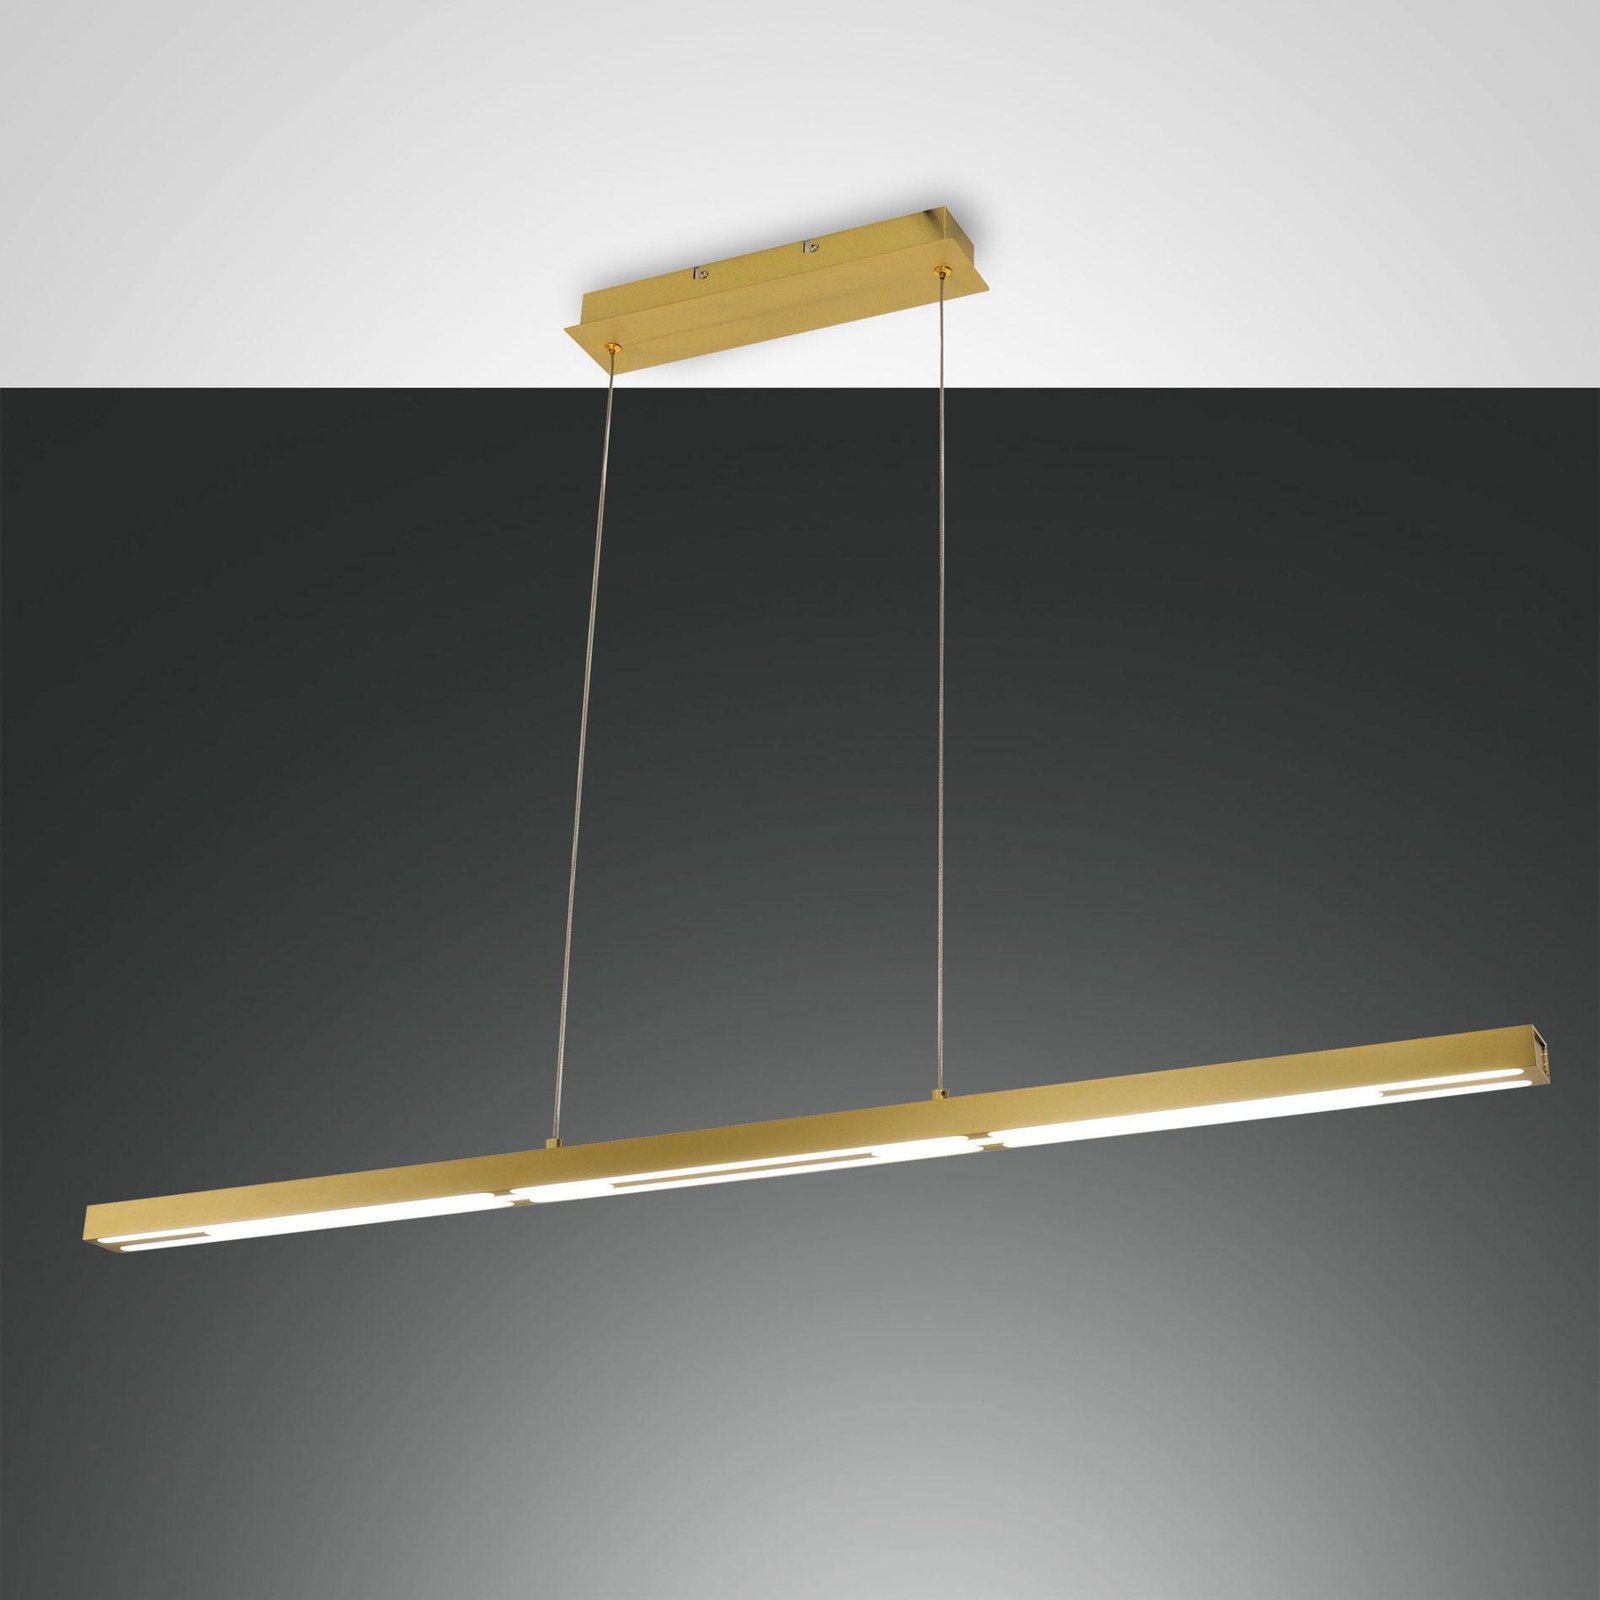 LED pendant light Ling, brass, uplight and downlight, dimmable